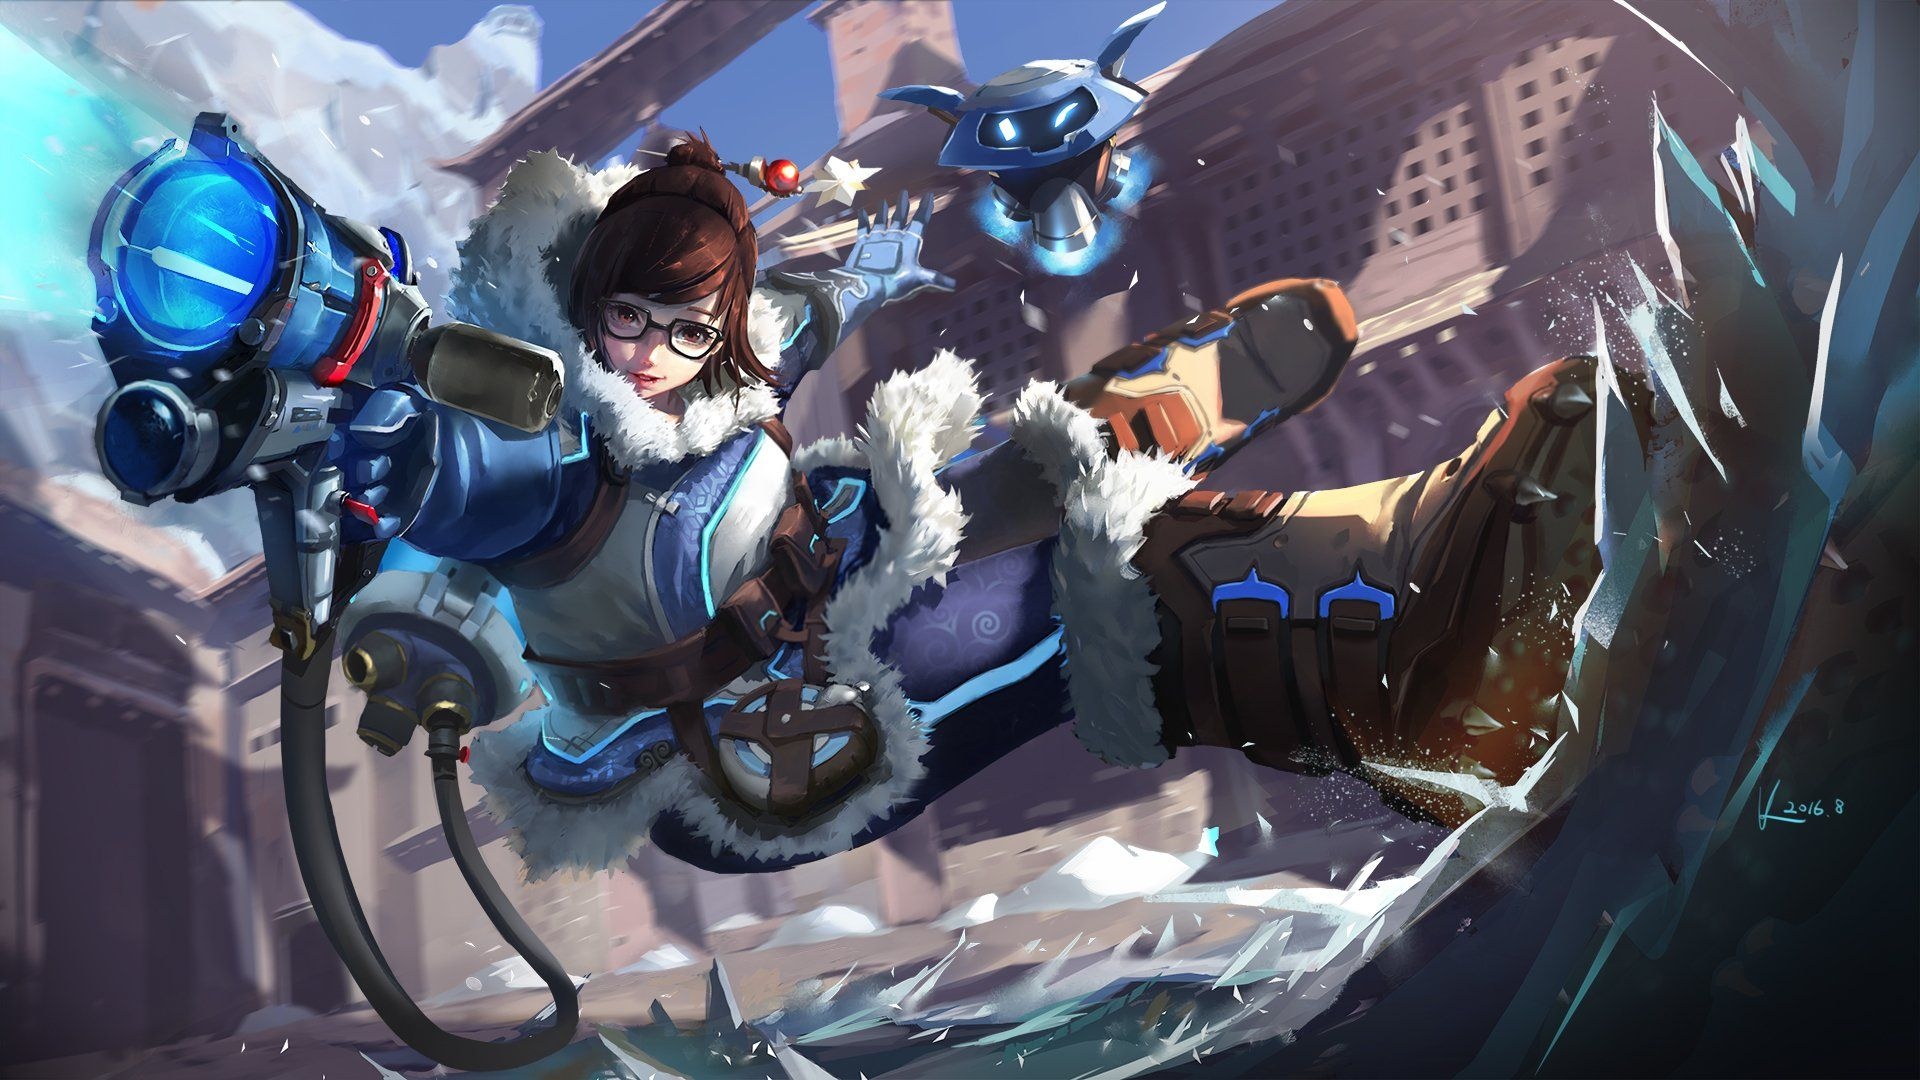 Mei (Overwatch), Gaming character, Digitally created, Action-packed, 1920x1080 Full HD Desktop